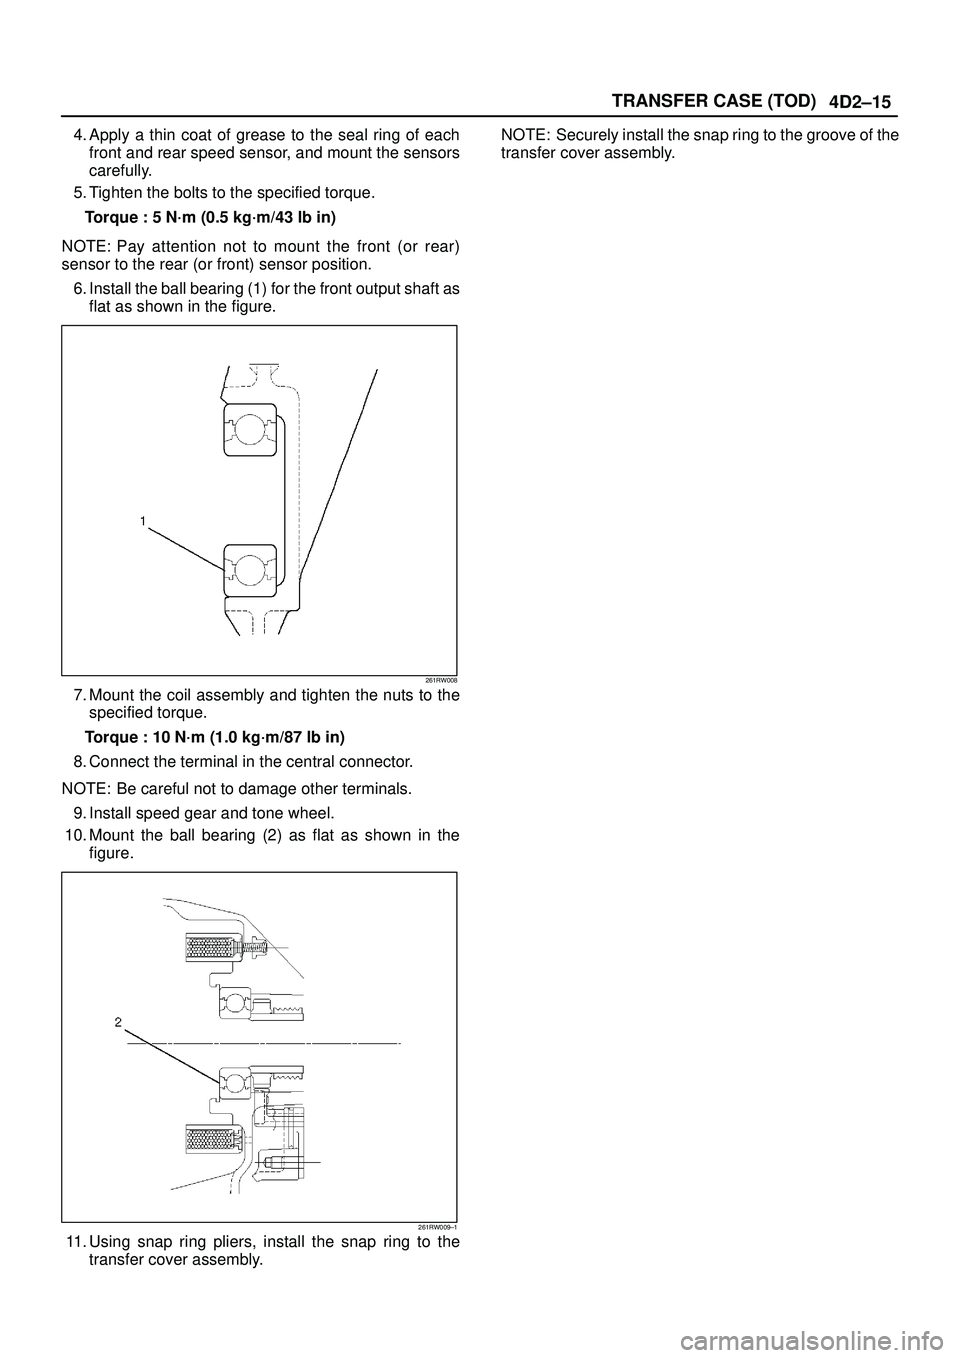 ISUZU TROOPER 1998  Service Owners Manual 4D2±15 TRANSFER CASE (TOD)
4. Apply a thin coat of grease to the seal ring of each
front and rear speed sensor, and mount the sensors
carefully.
5. Tighten the bolts to the specified torque.
Torque :